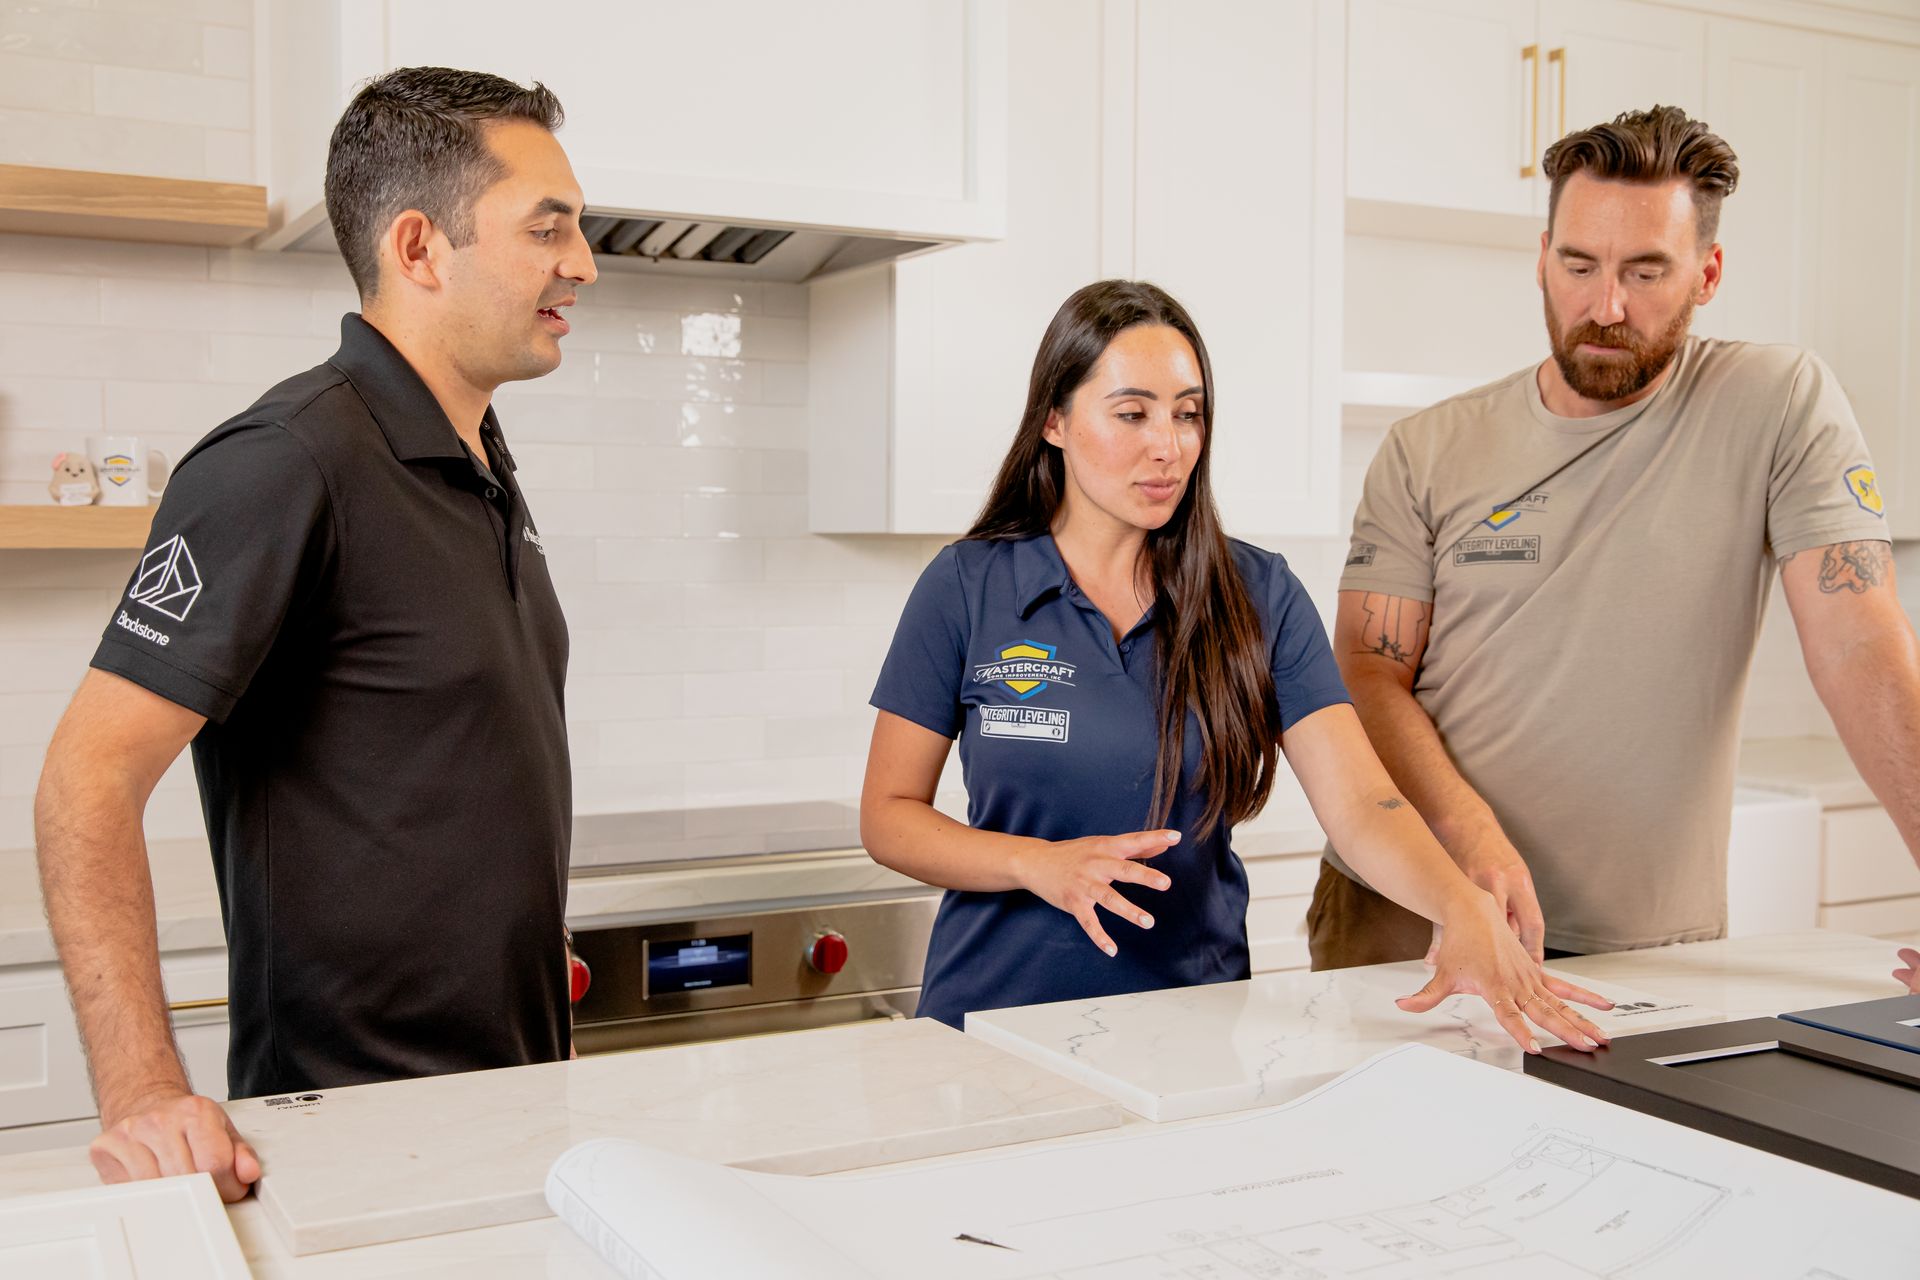 A group of people are standing around a kitchen counter looking at a blueprint.